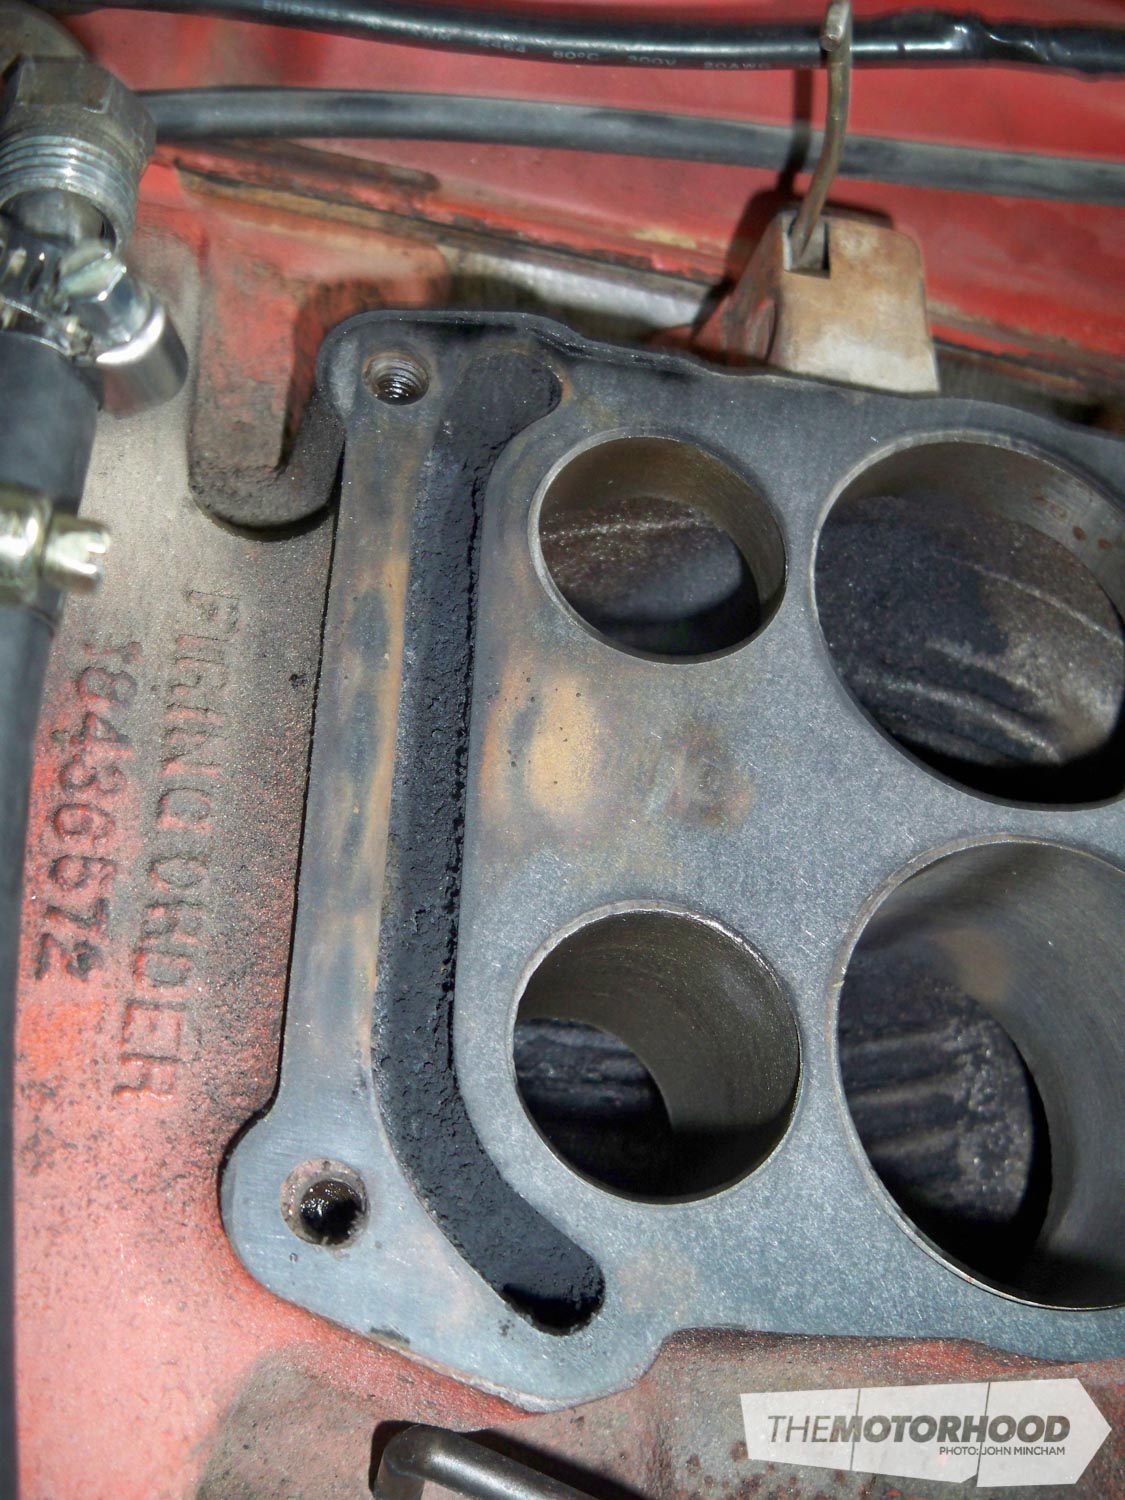 The discolouration shows the effect of the carb being warped. The soot you see in the cross-over pipe in indicative of what the rest of the carb looked like